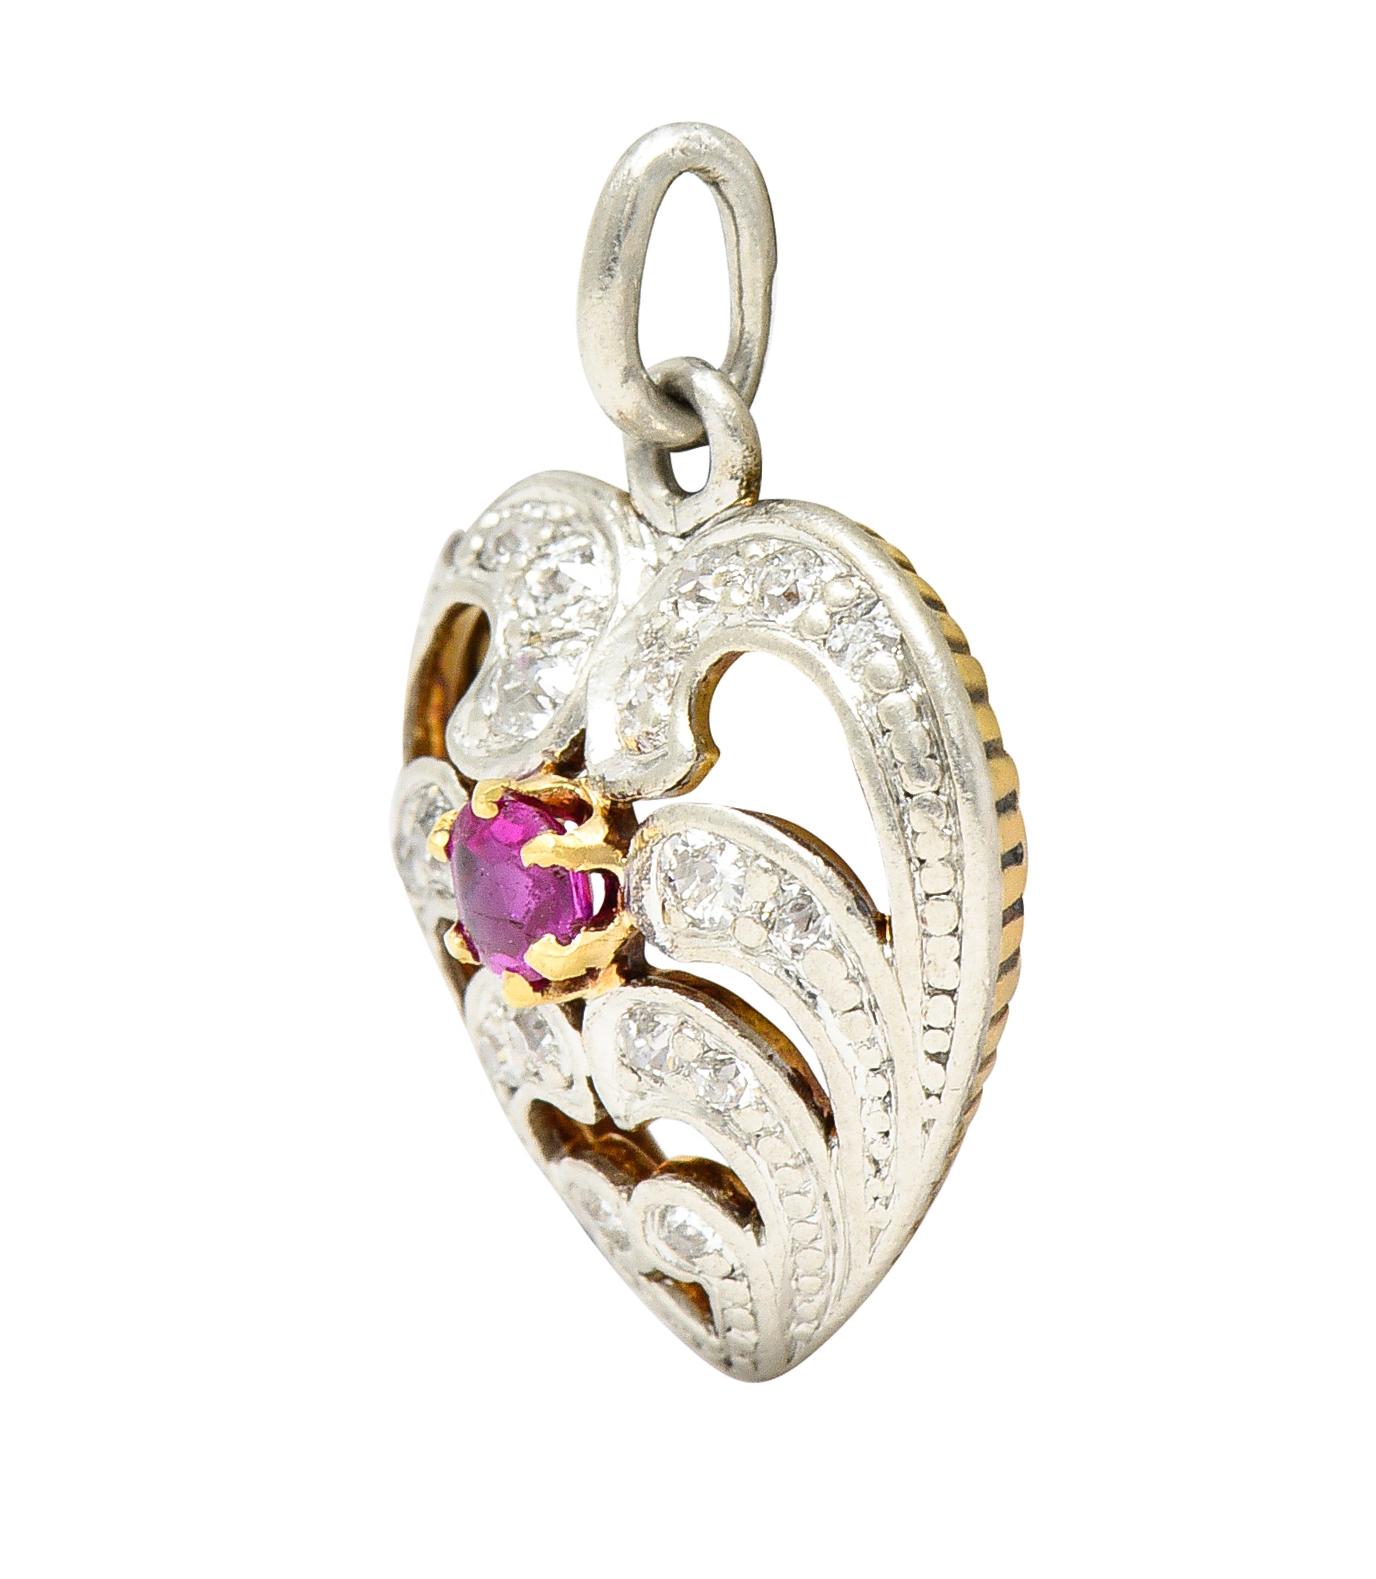 Charm is designed as a scrolling heart motif with platinum bead detailing. Centering a cushion shaped buff top ruby weighing approximately 0.20 carat - purple/red in color. Surrounded by old European cut diamonds weighing in total approximately 0.25